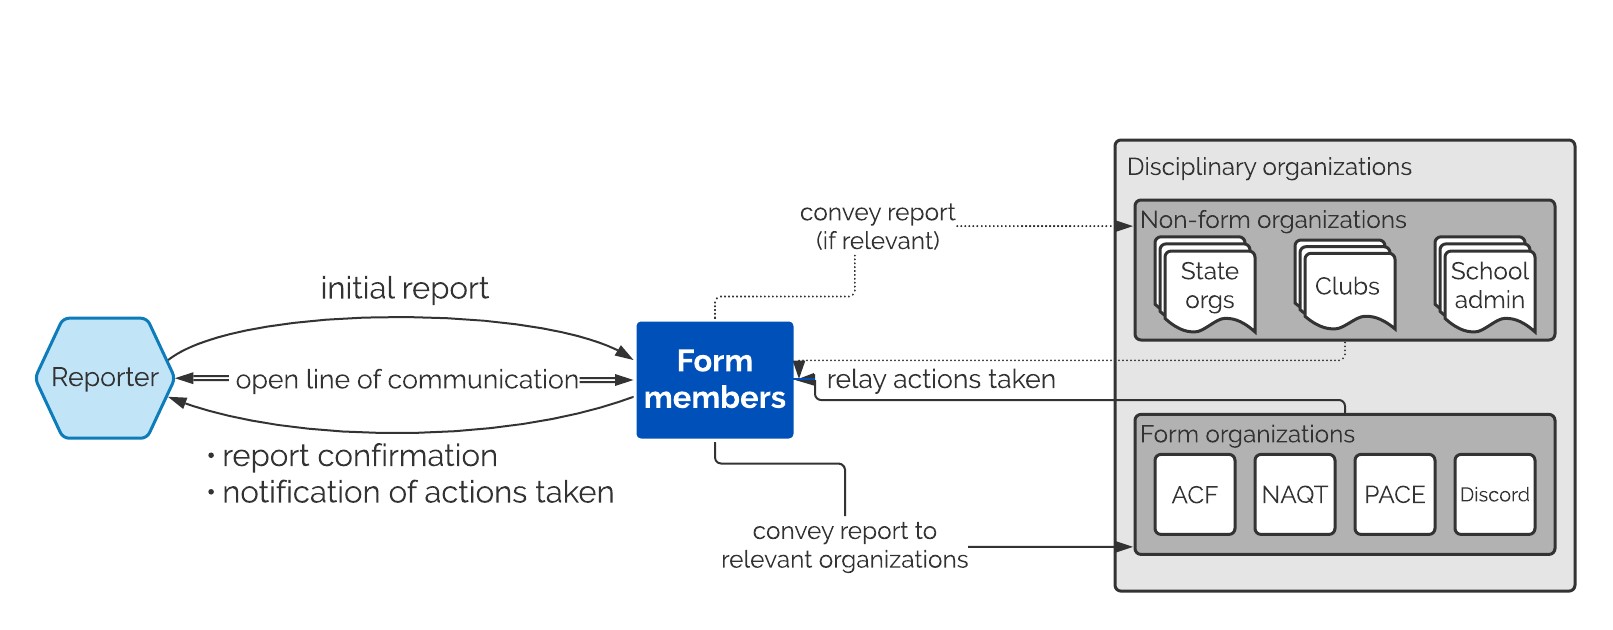 Schematic of misconduct reporting process